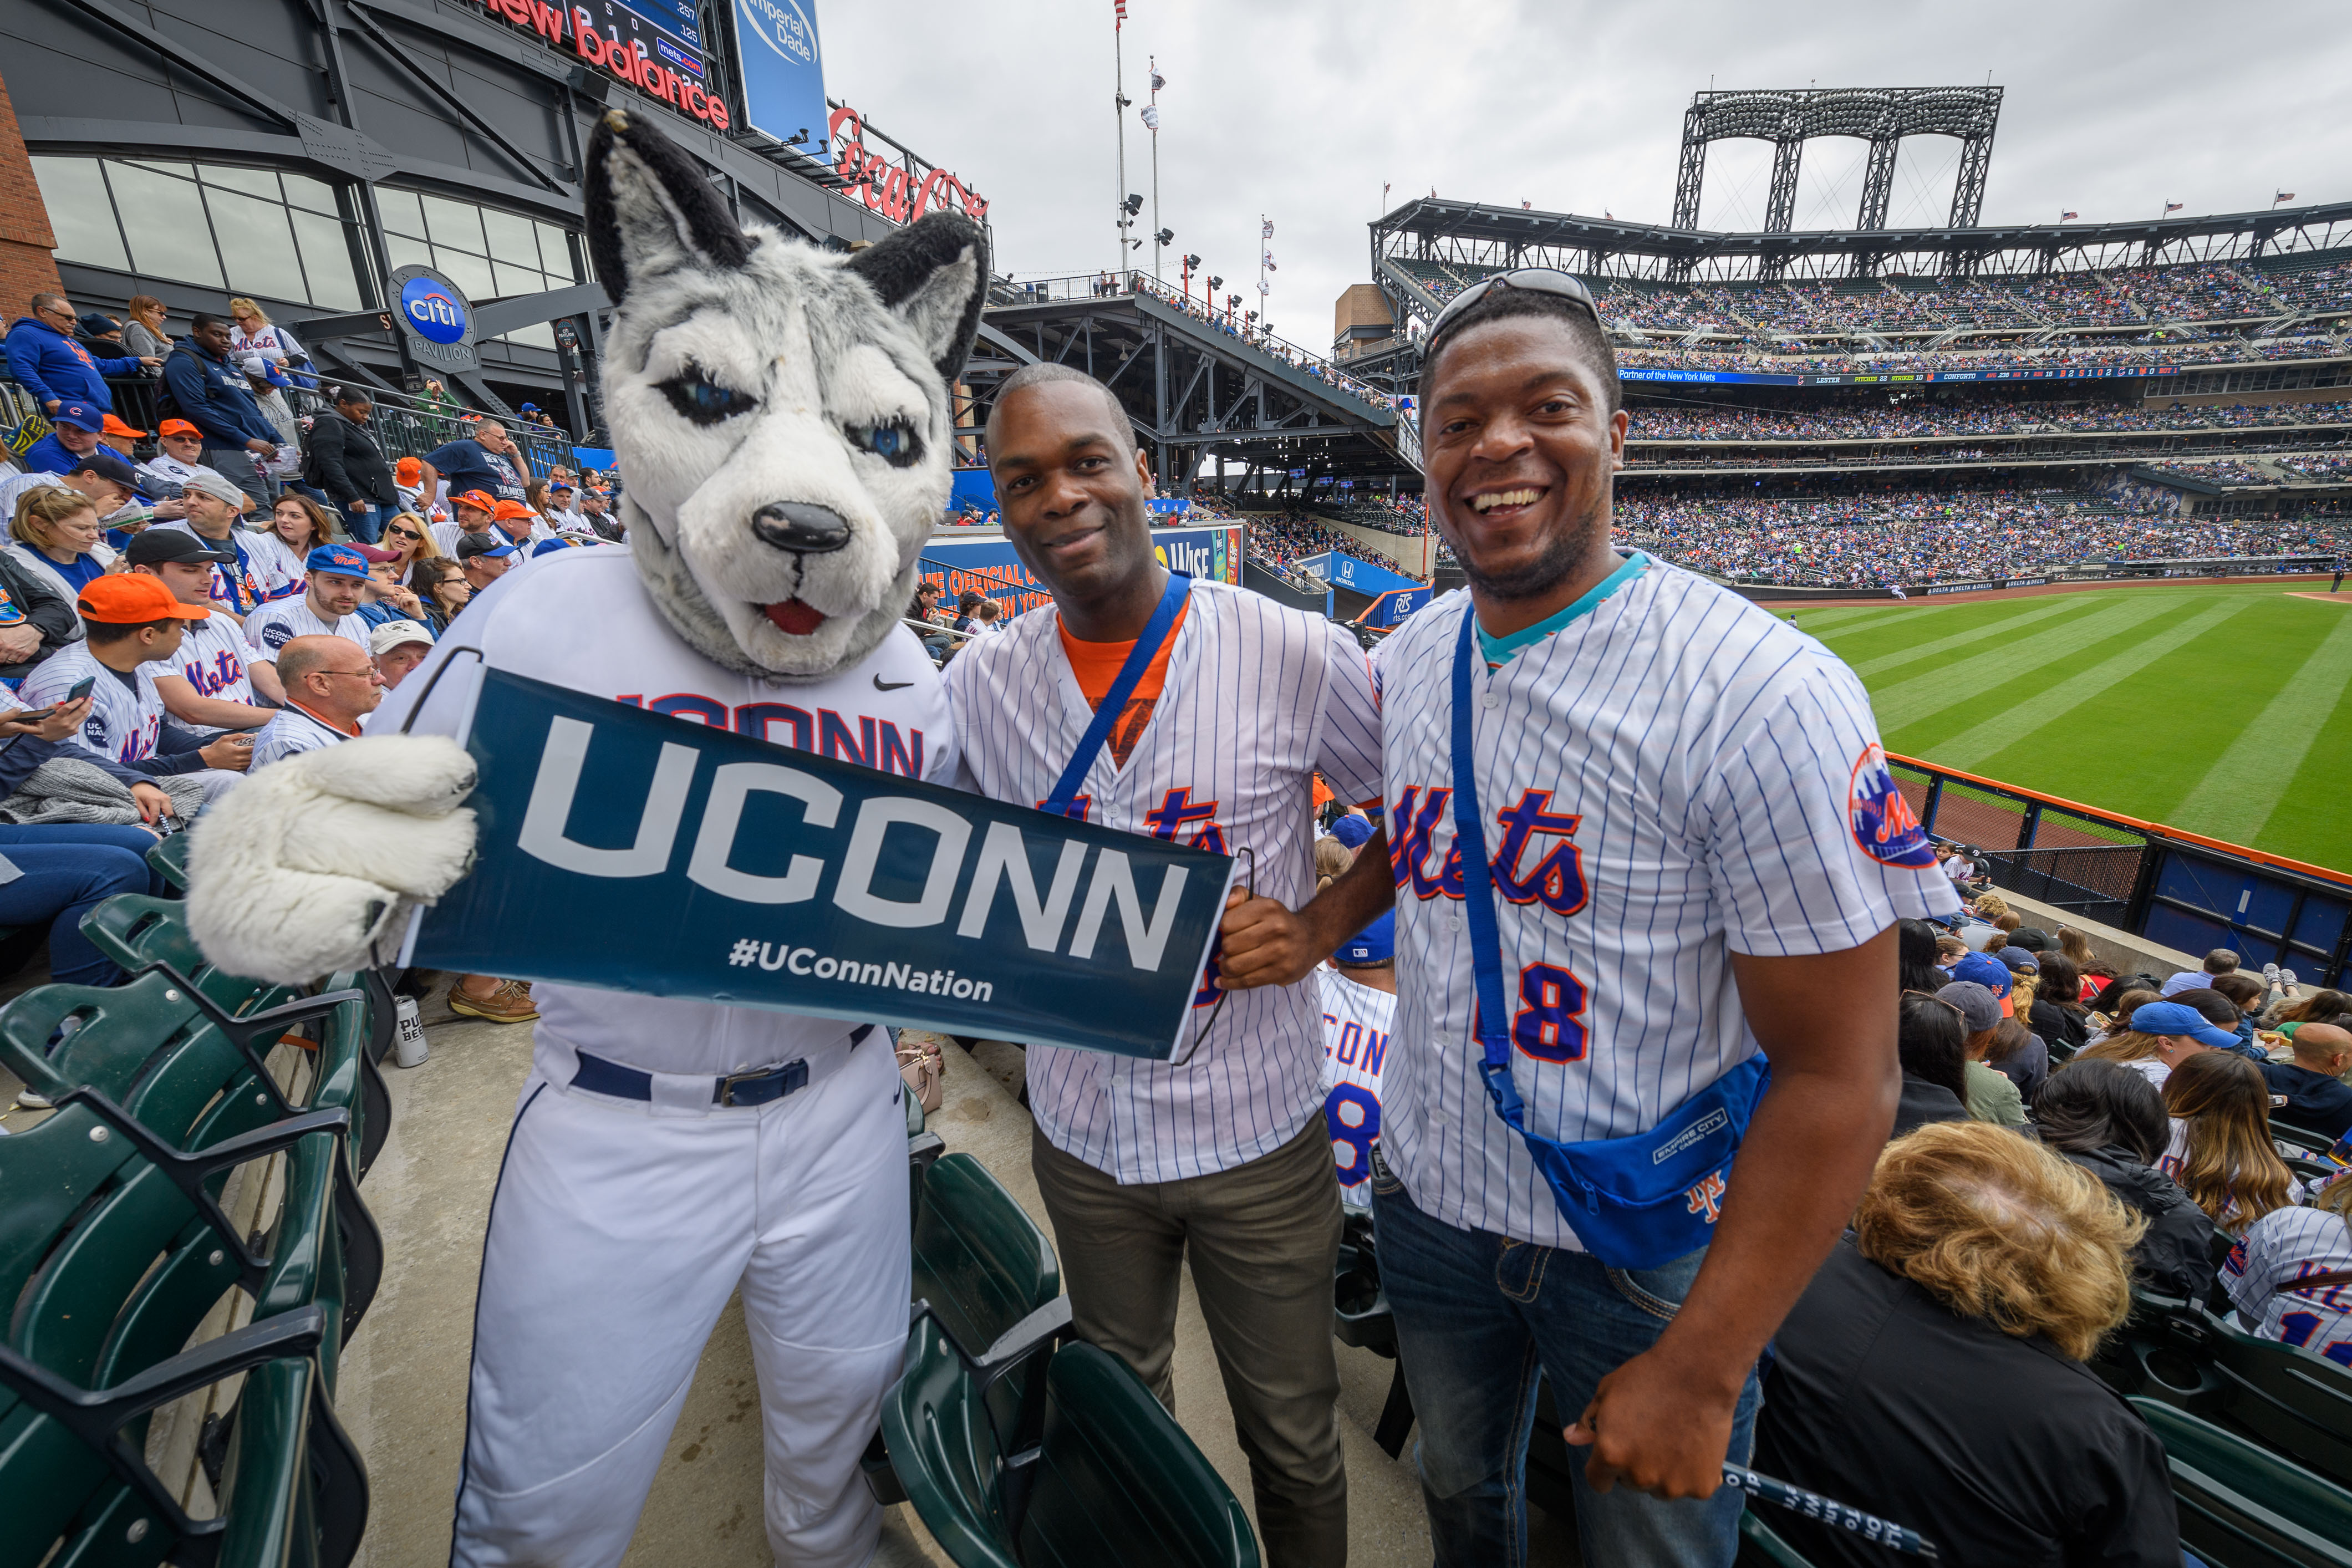 UConn Nation in Force at Citi Field - UConn Today